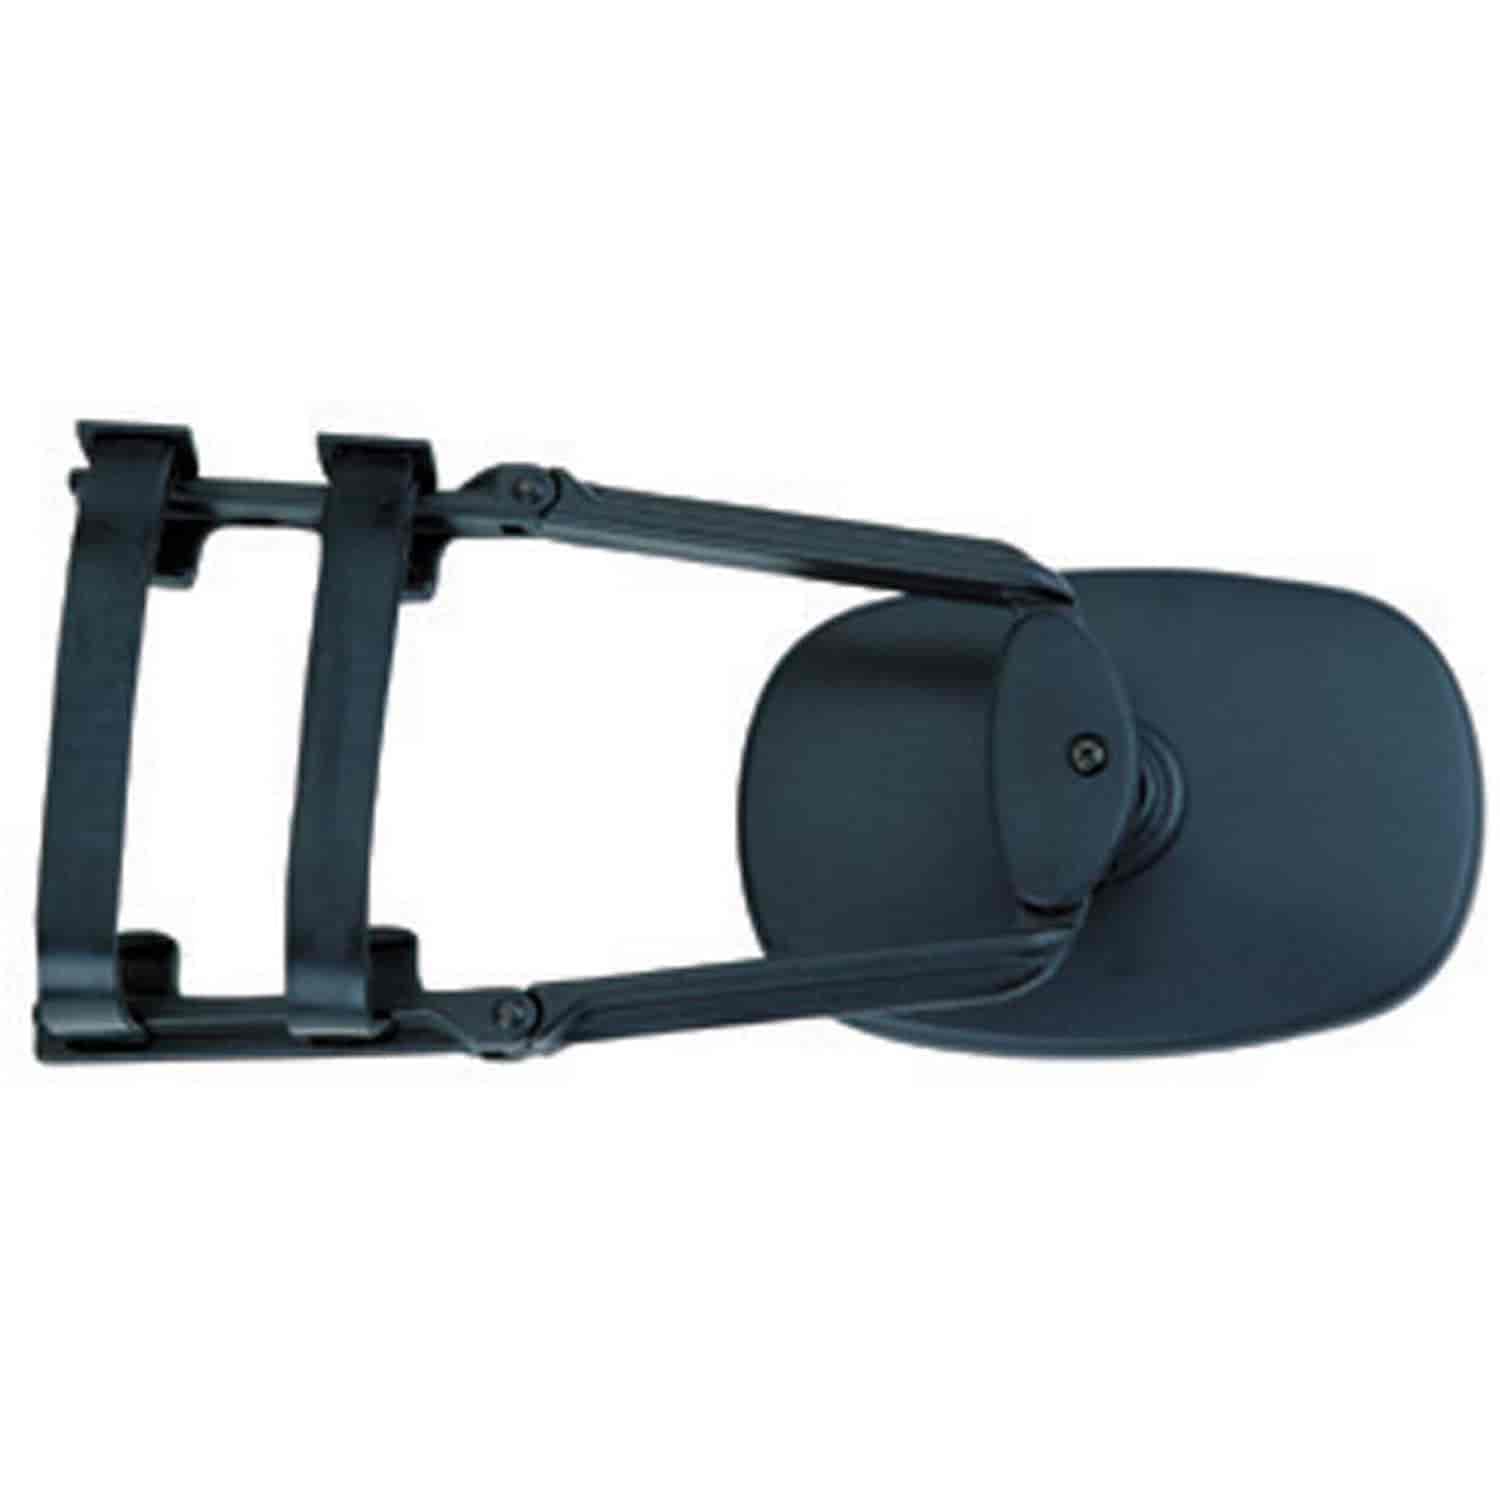 Universal Towing Mirror This is 5 inches by